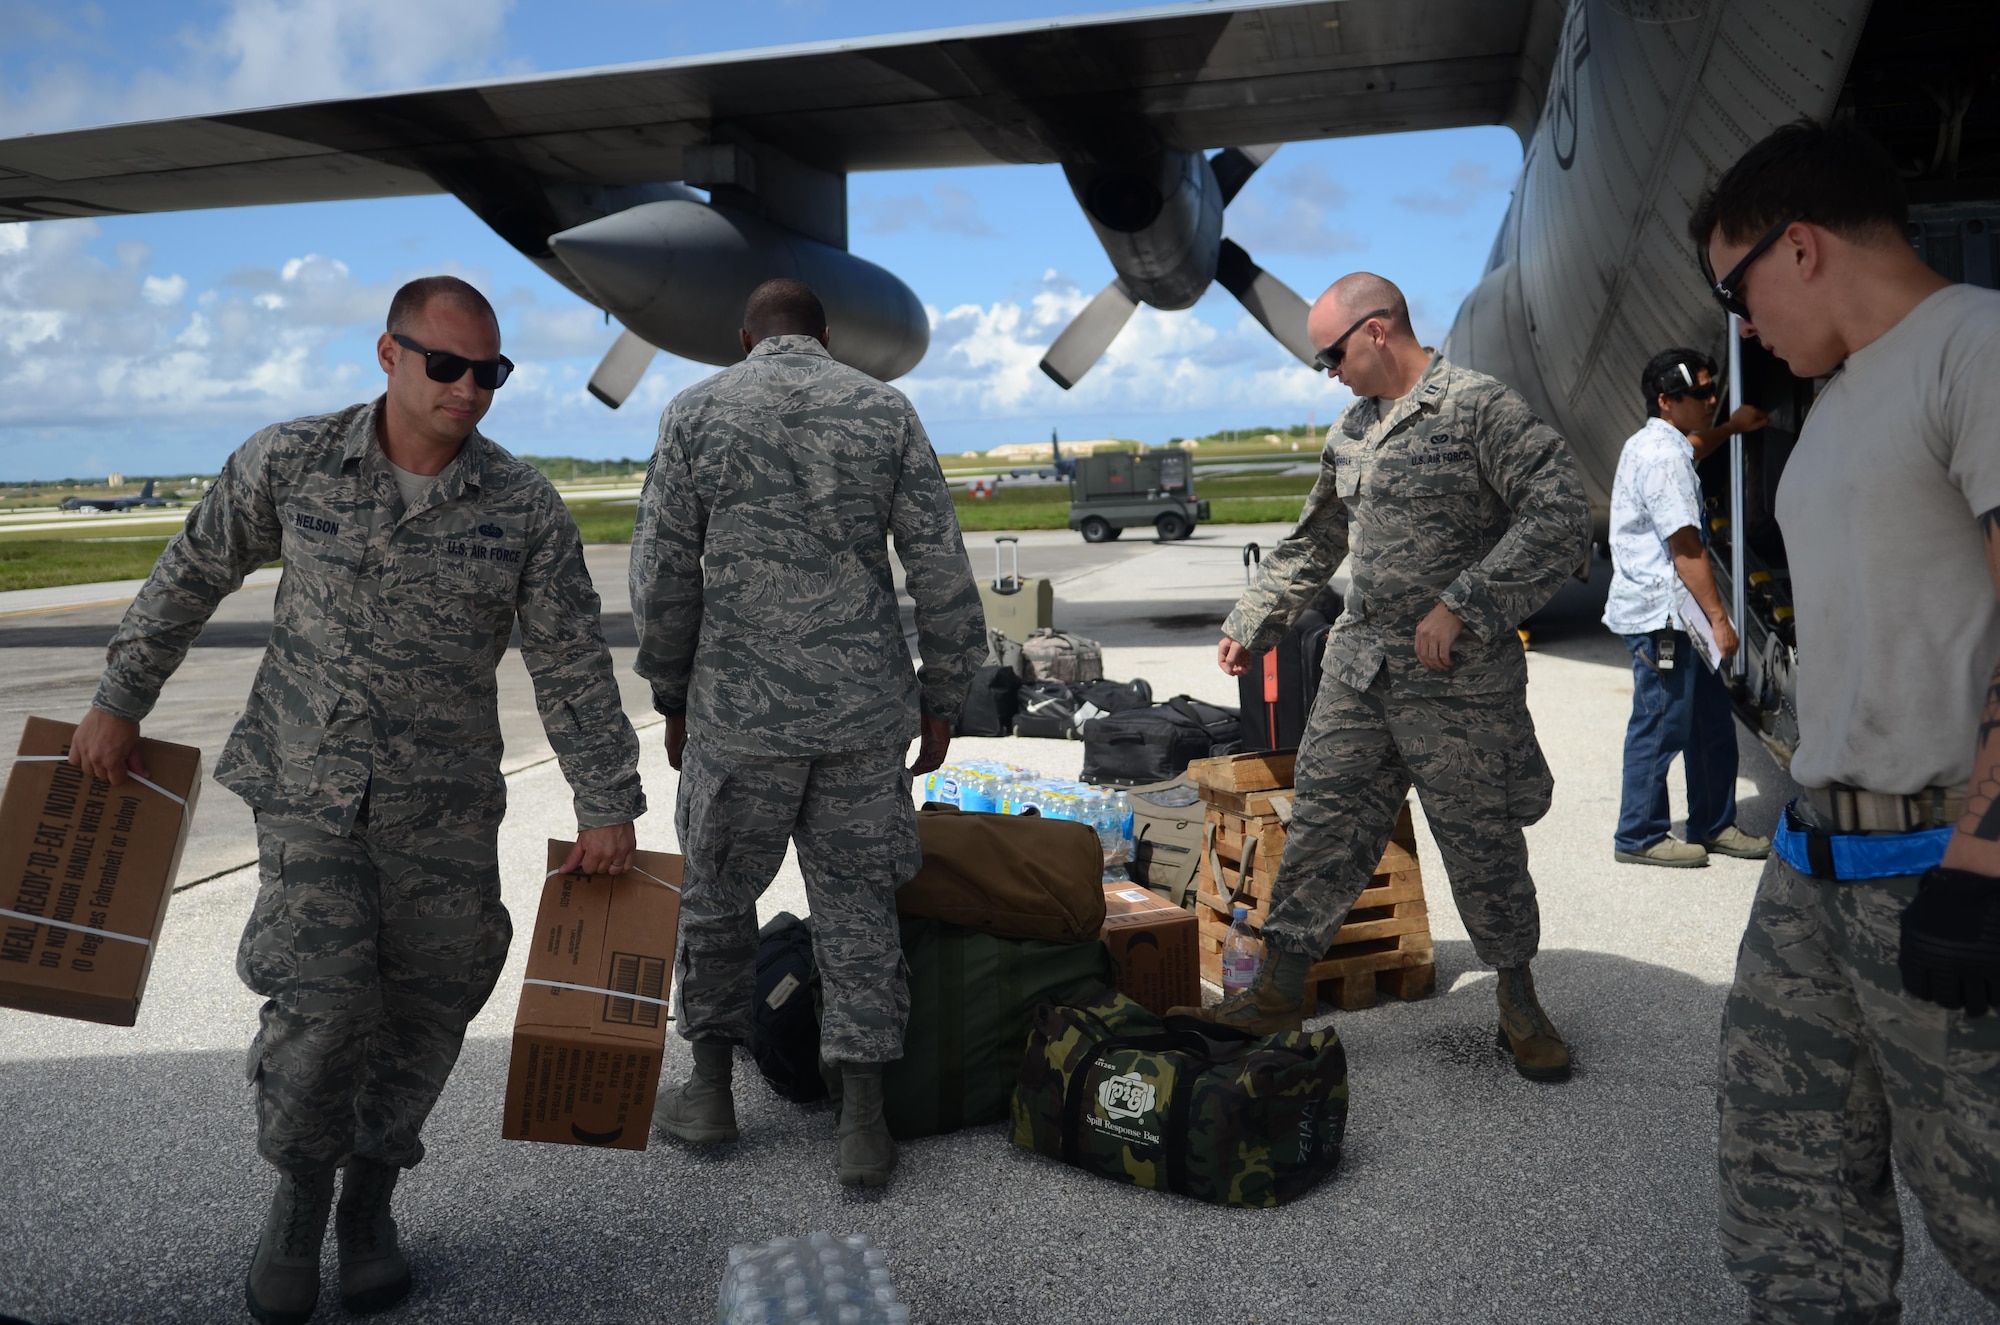 Airmen from the 36th Contingency Response Group load equipment into a C-130 Hercules before departing to support Operation Damayan in Tacloban, Philippines Nov. 14, 2013, at Andersen Air Force Base, Guam. Pacific Air Forces is poised to provide any requested support to Operation Damayan and the Philippine government to rapidly deliver humanitarian assistance and disaster relief to the areas the Philippine government deems most in need. 